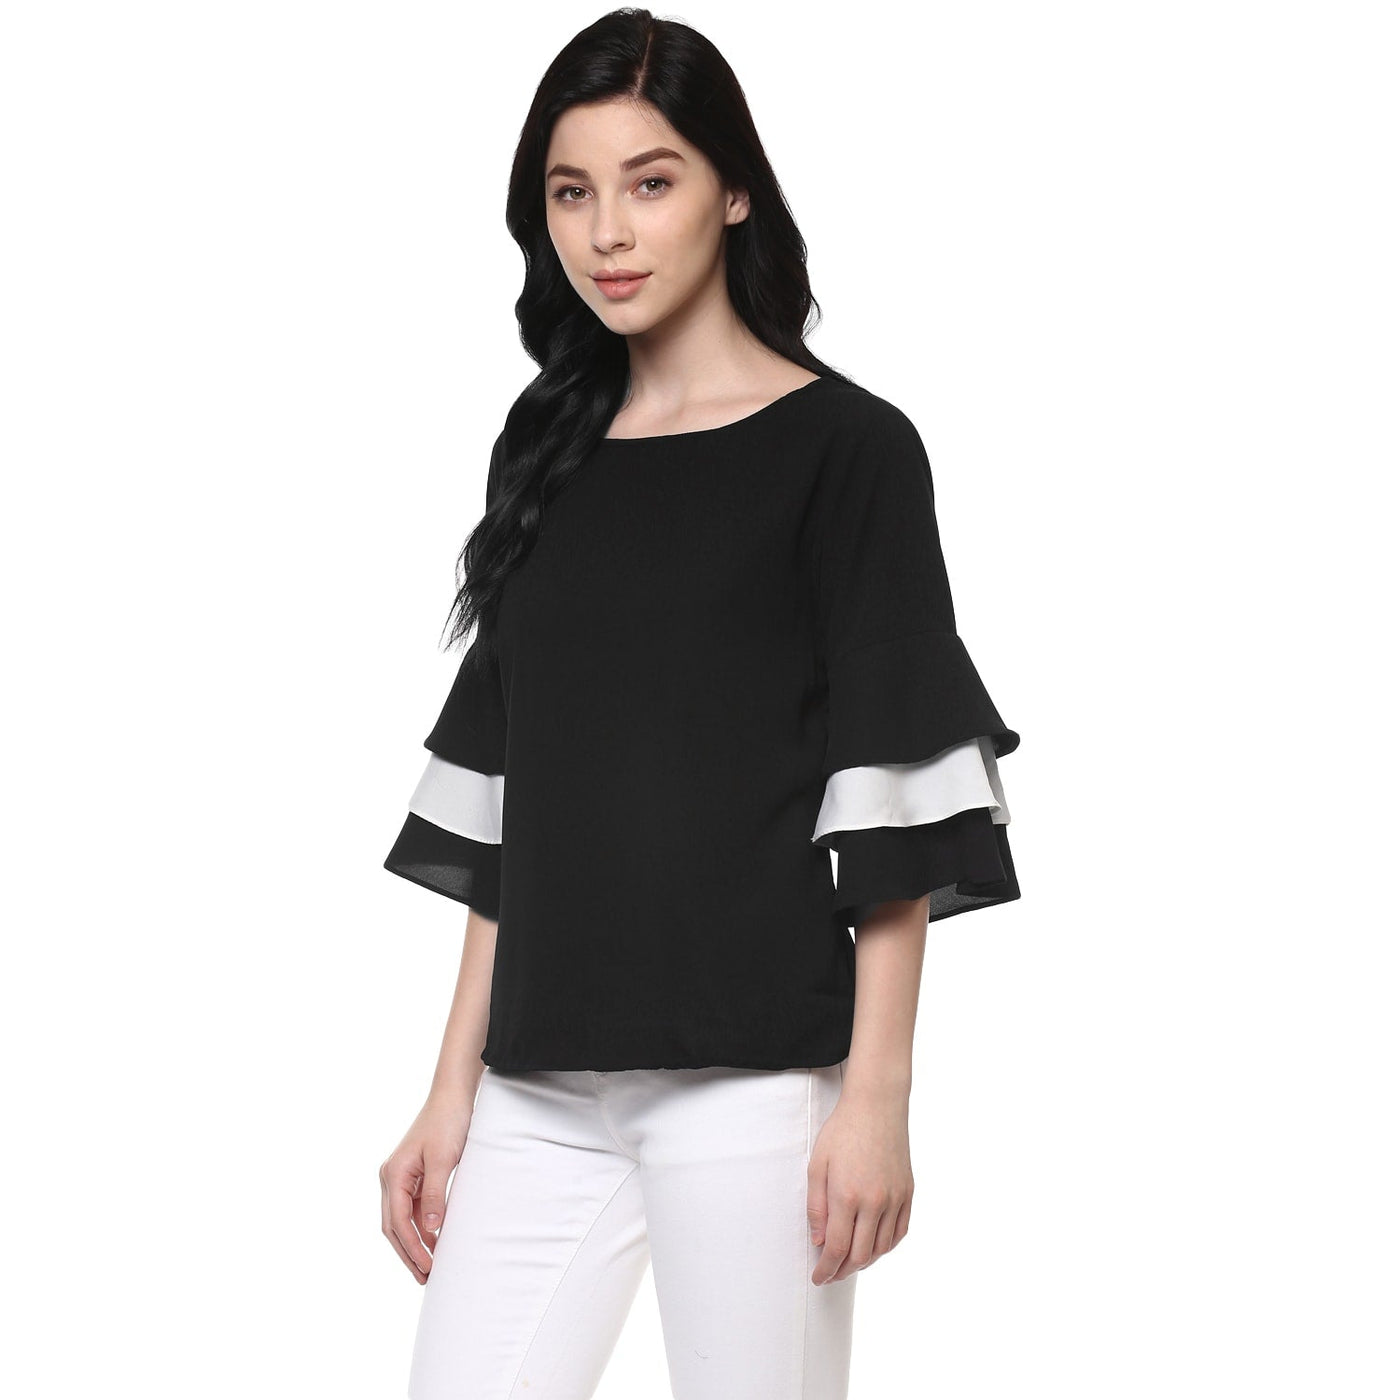 Solid Monocromatic Flare Sleeve Top